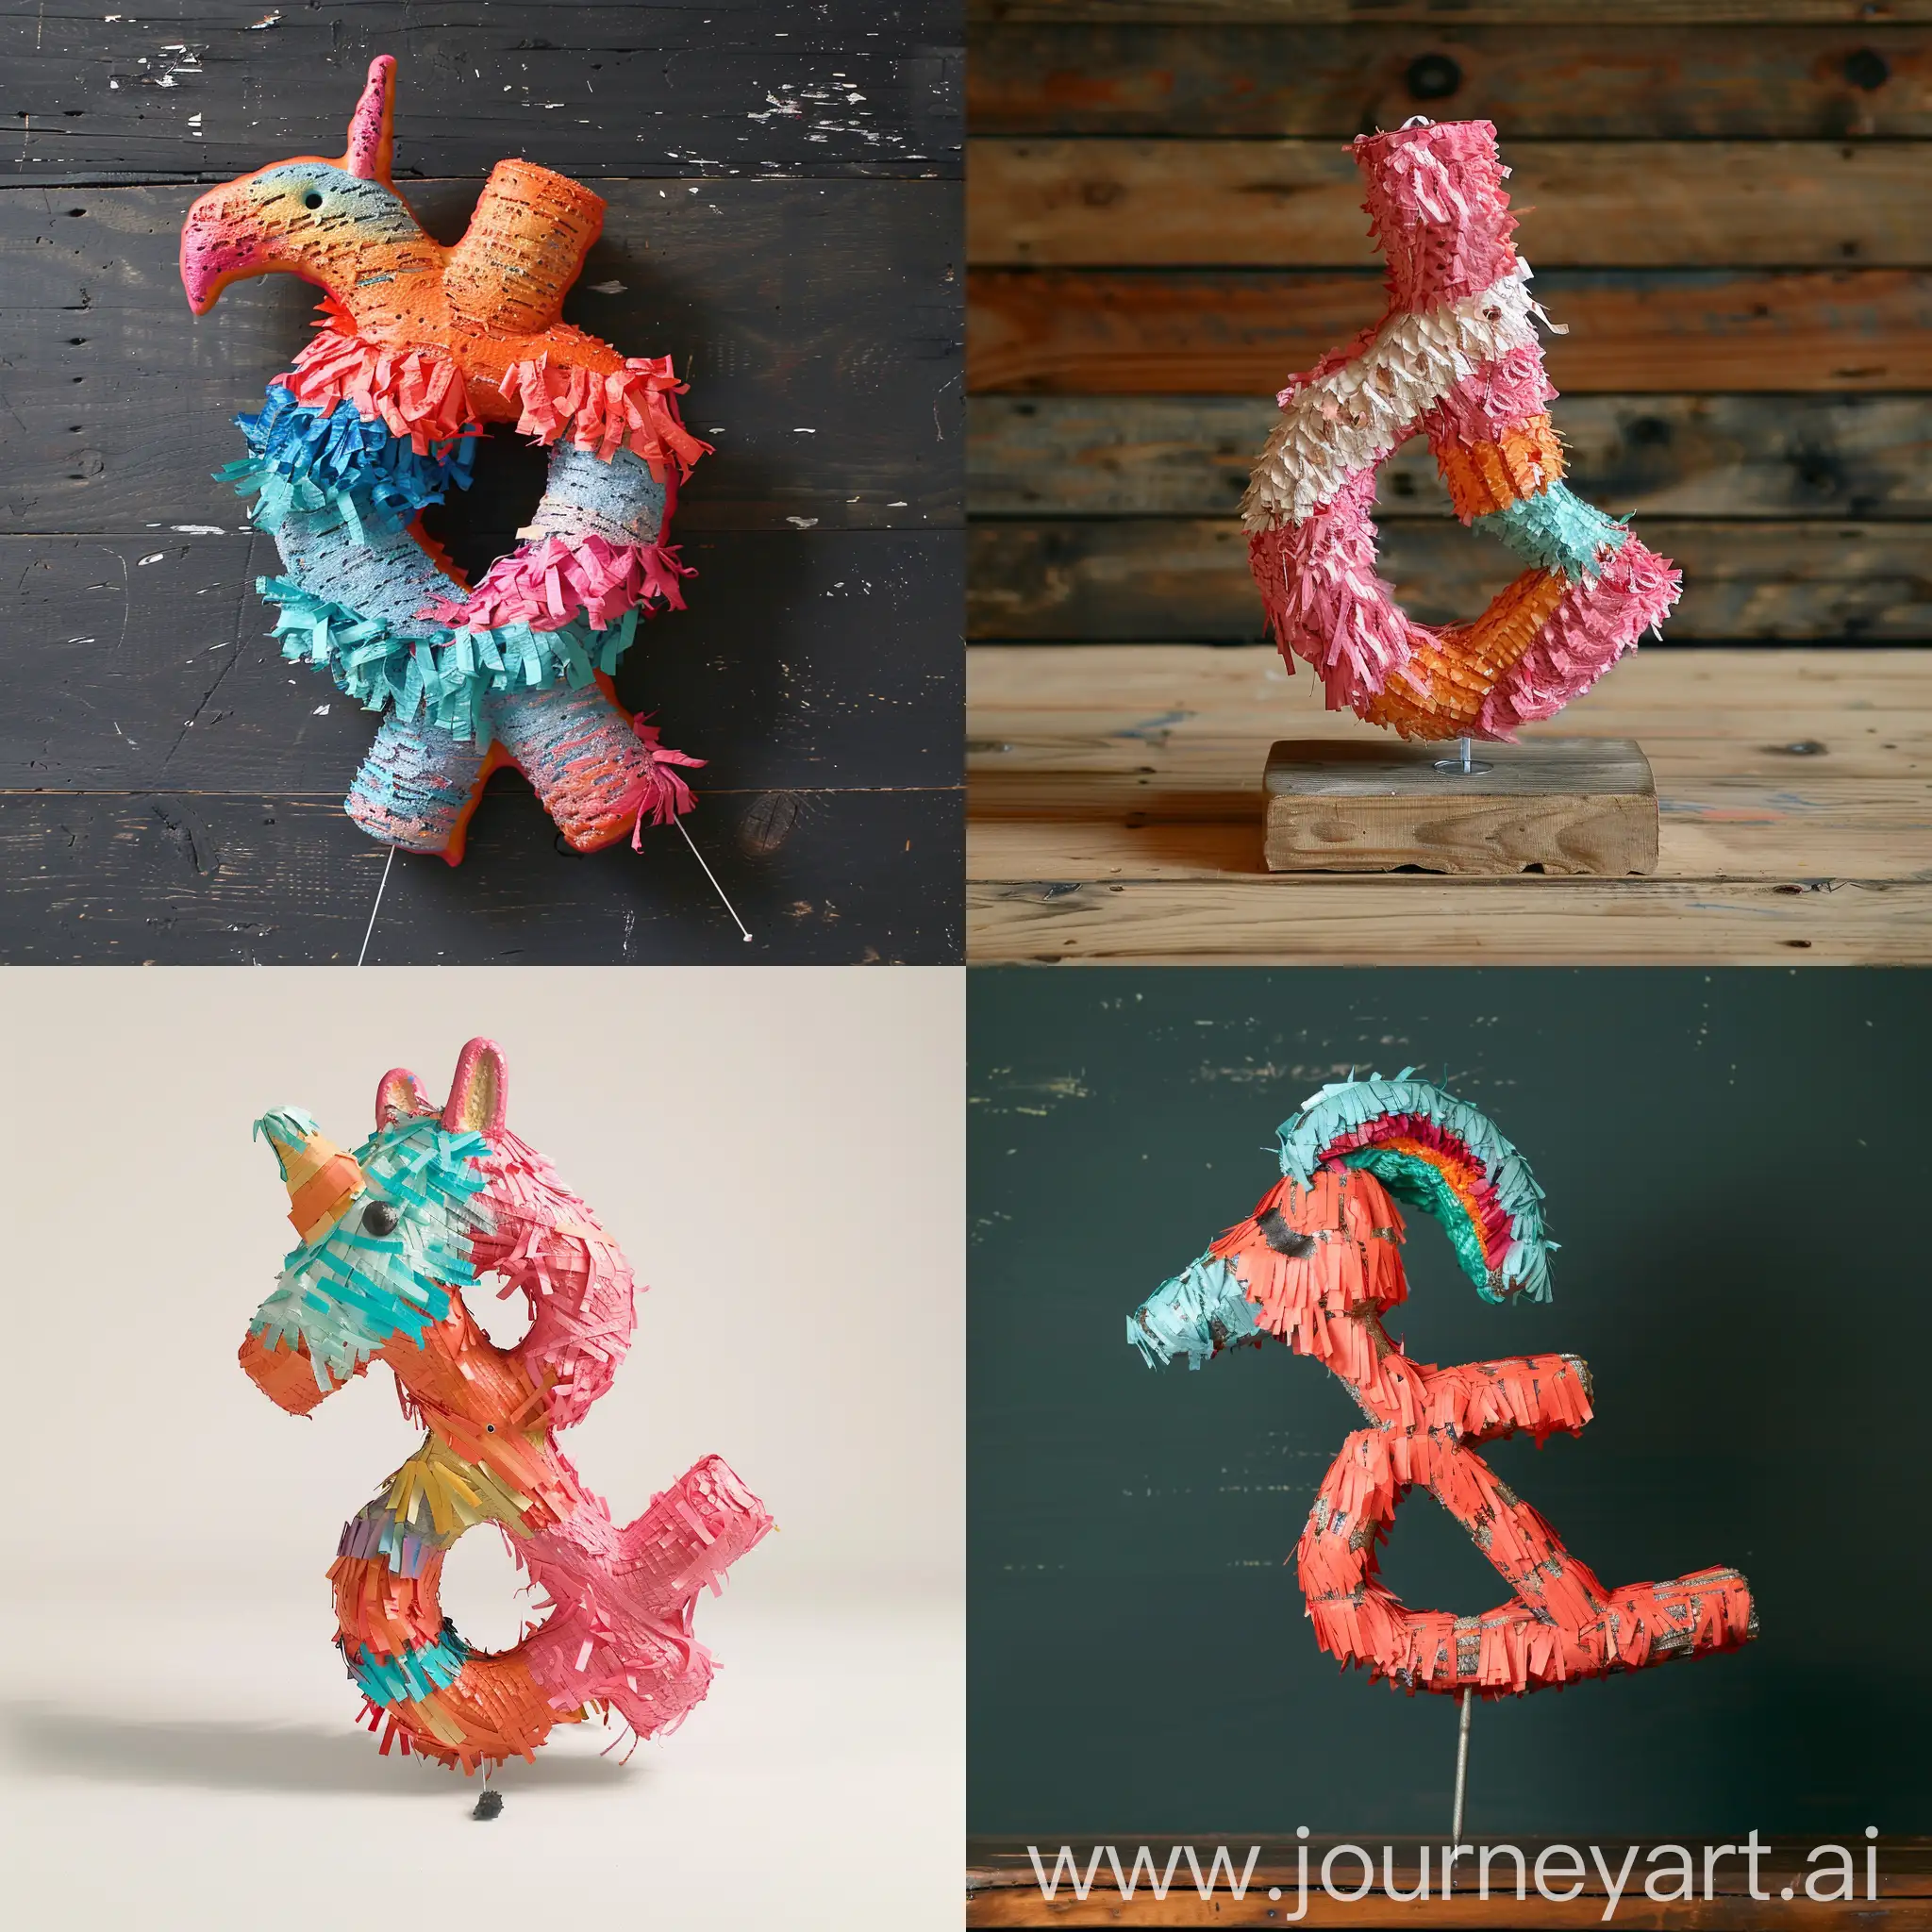 ampersand in the shape of a pinata